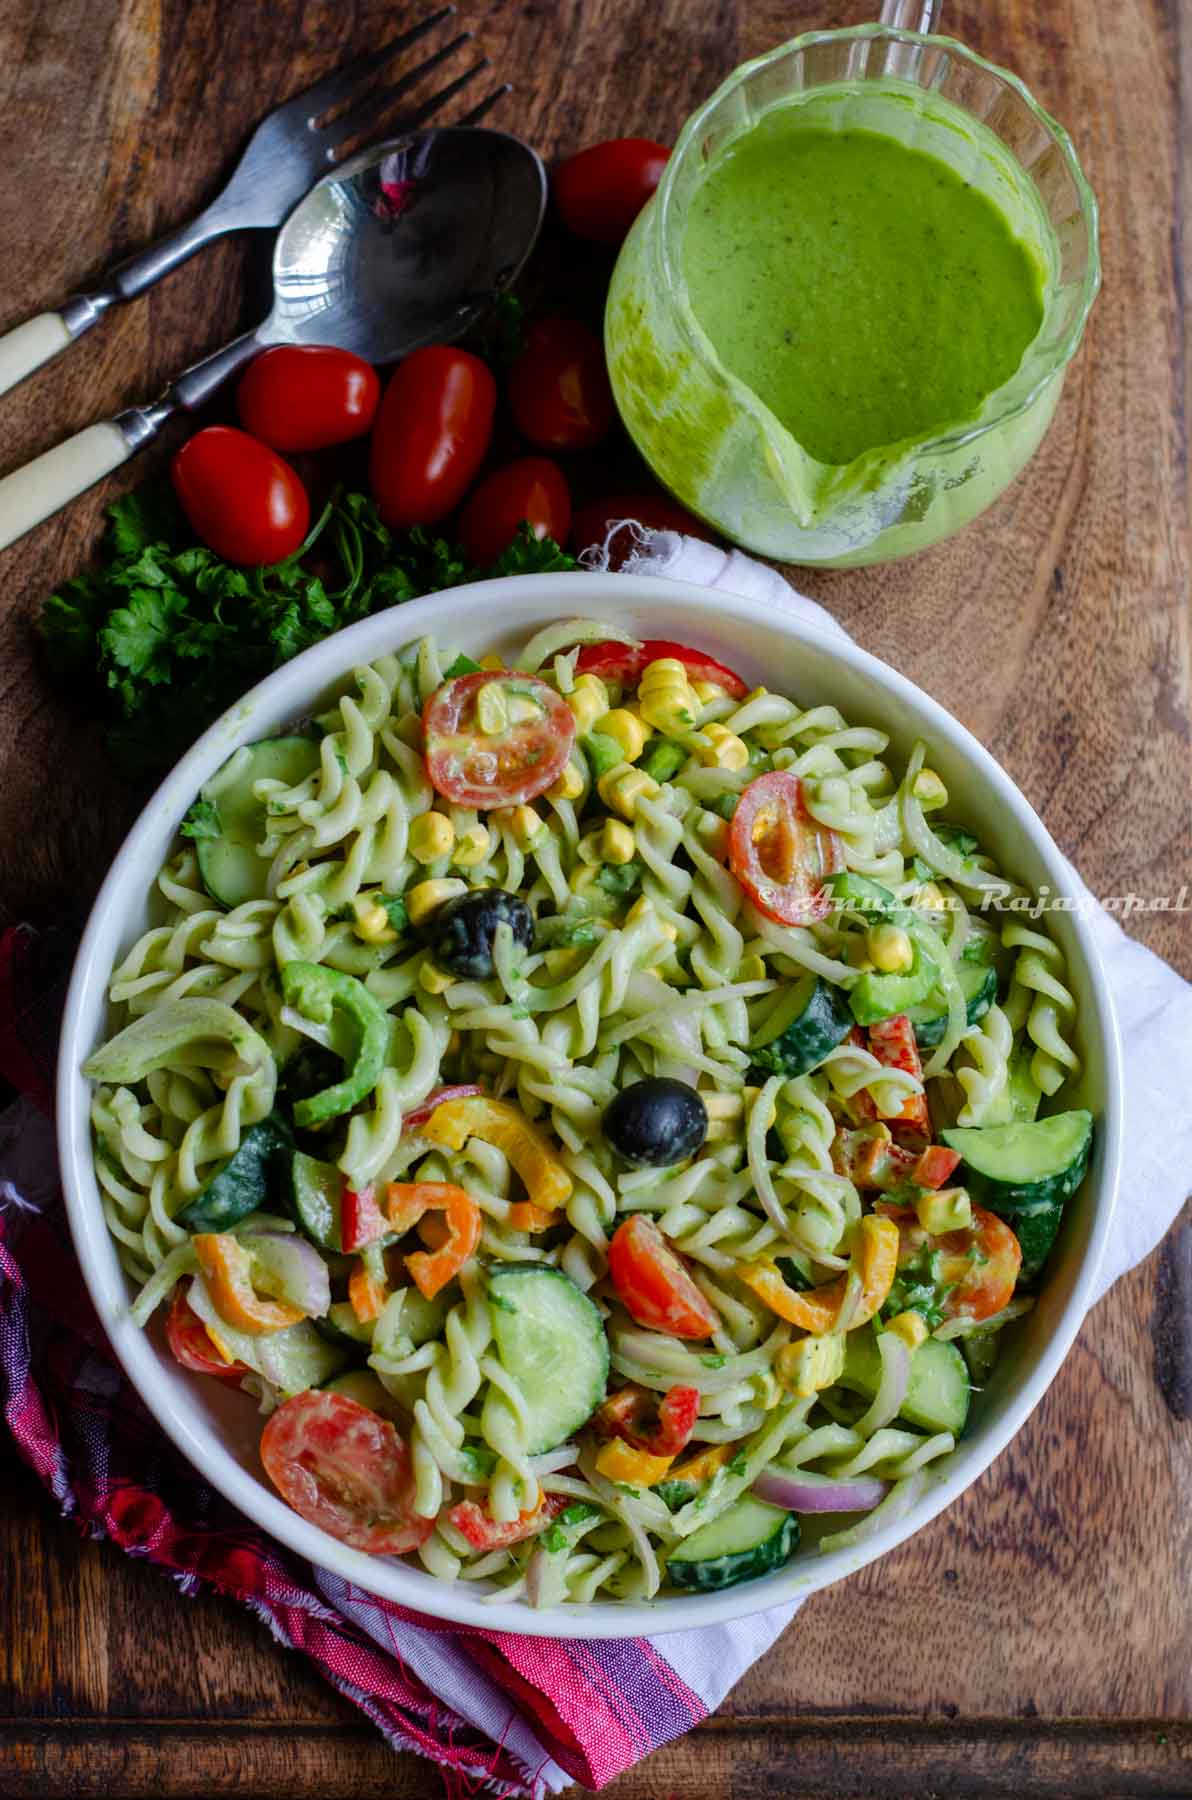 summer pasta salad served in a deep white bowl placed on a wooden board. Cutlery by the side and tomatoes and herbs around.